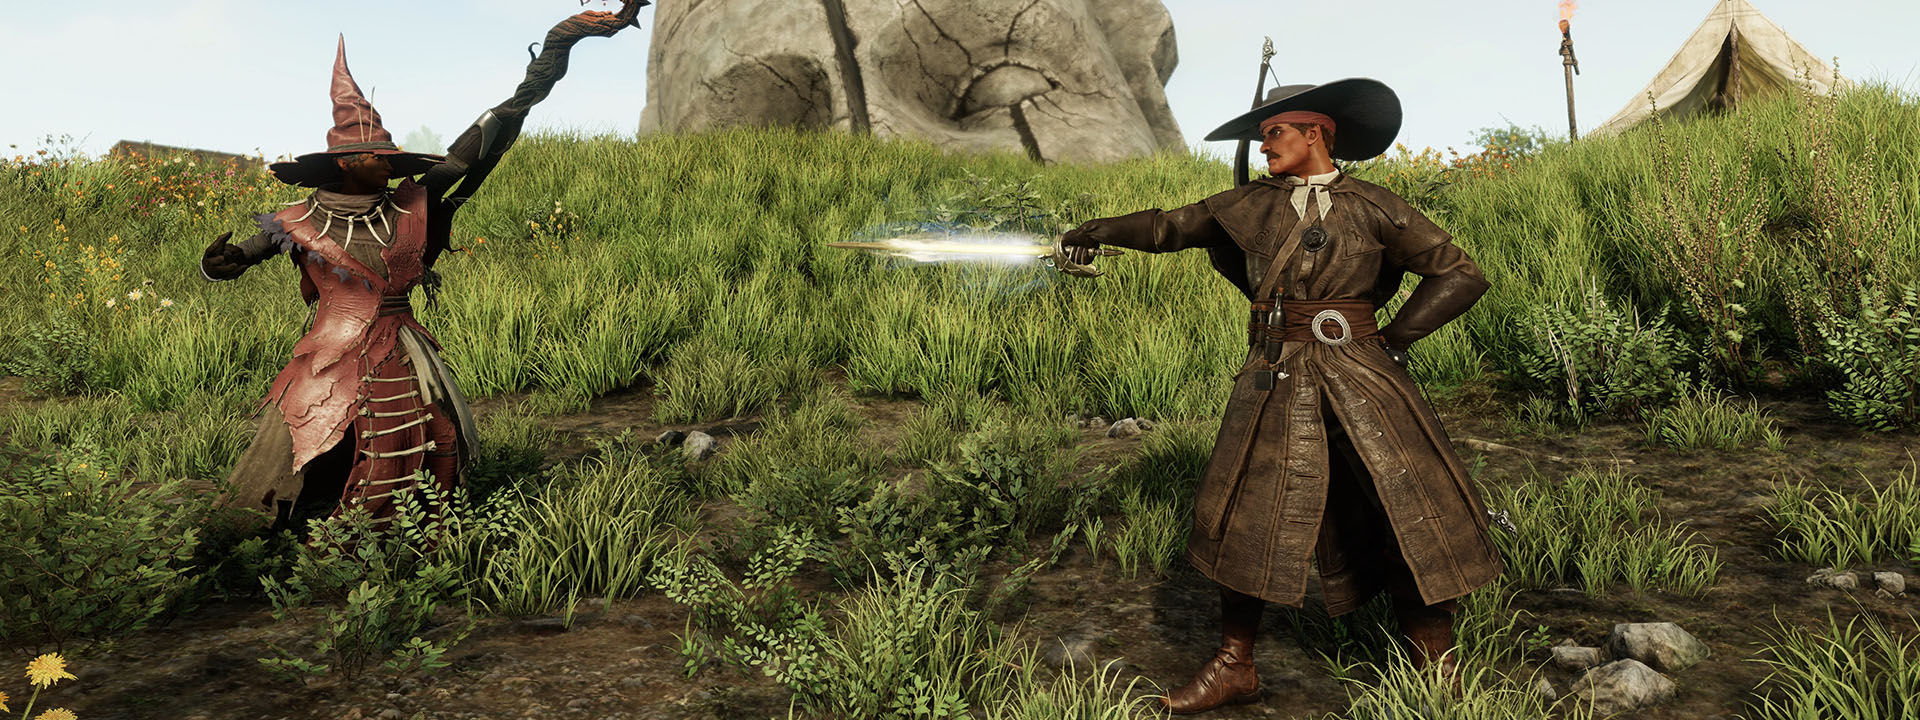 A man in a long leather trench coat stands ready to duel, one hand tucked behind his back and the other holding out a rapier pointed at an adversary. 